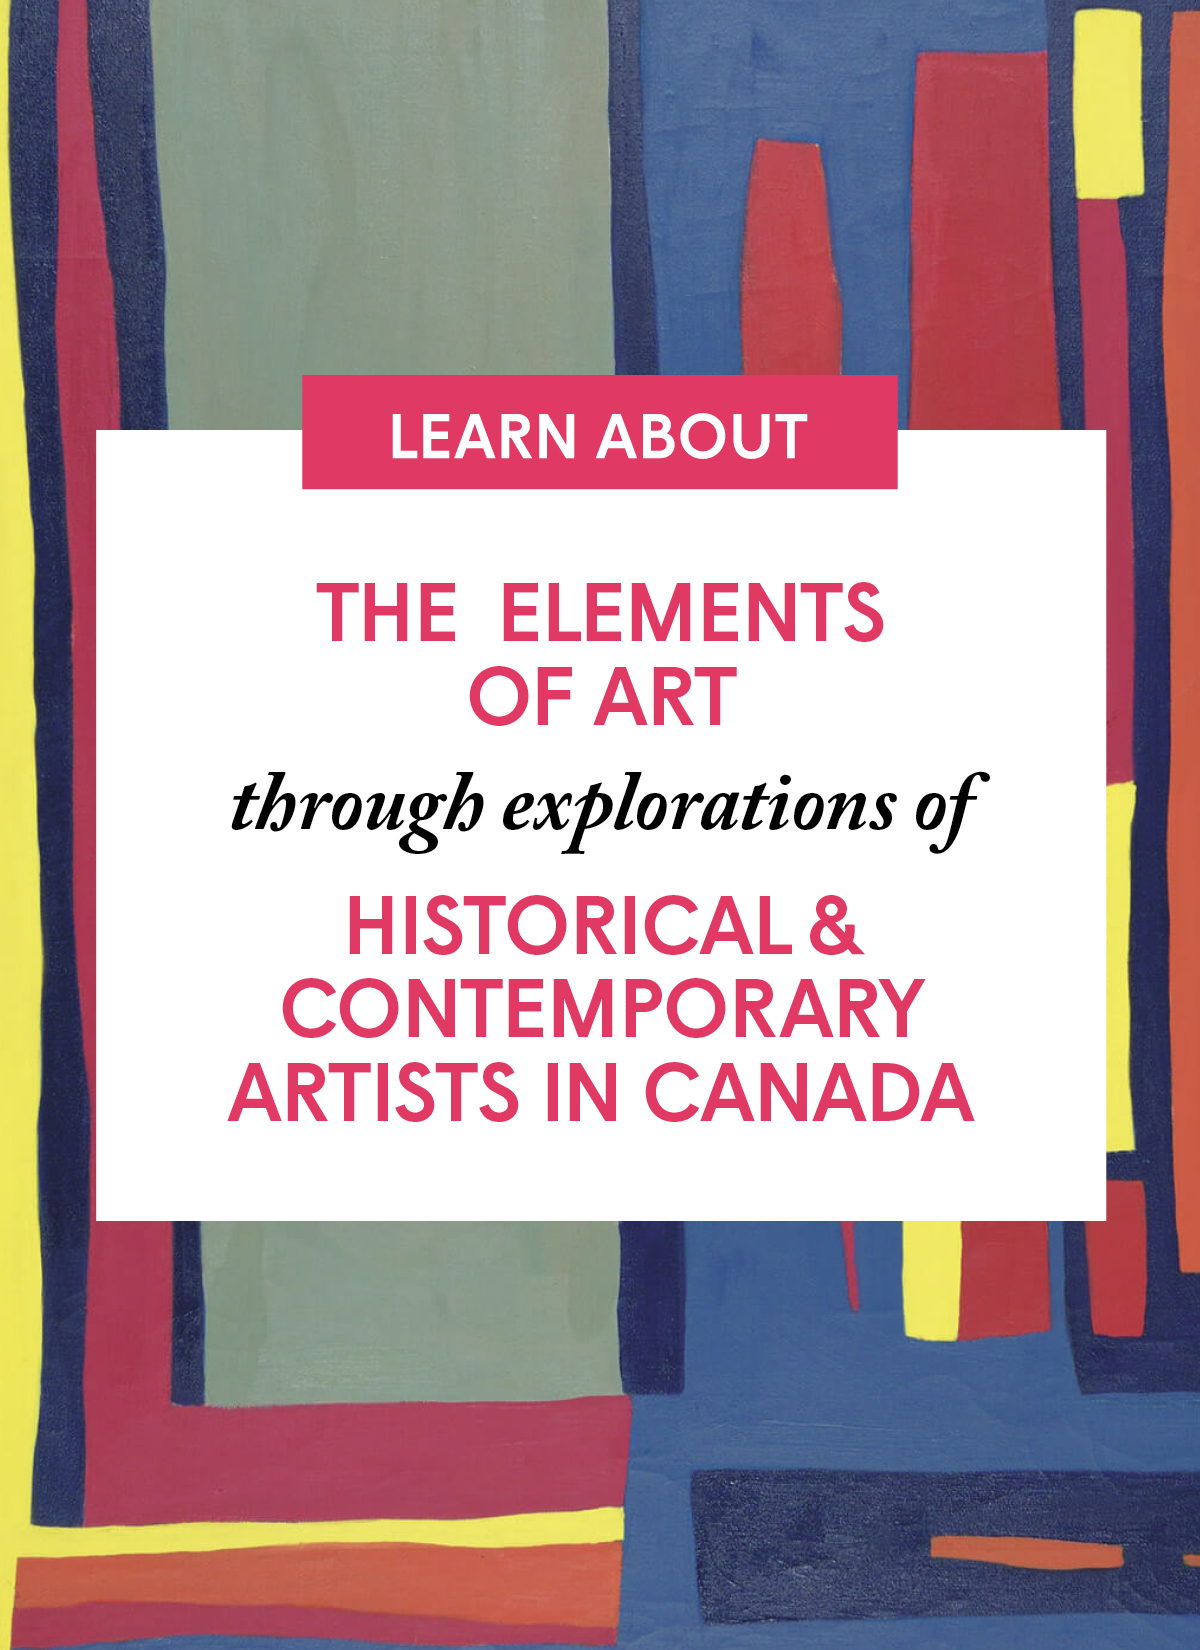 The Elements of Art through explorations of Historical and Contemporary Artists in Canada